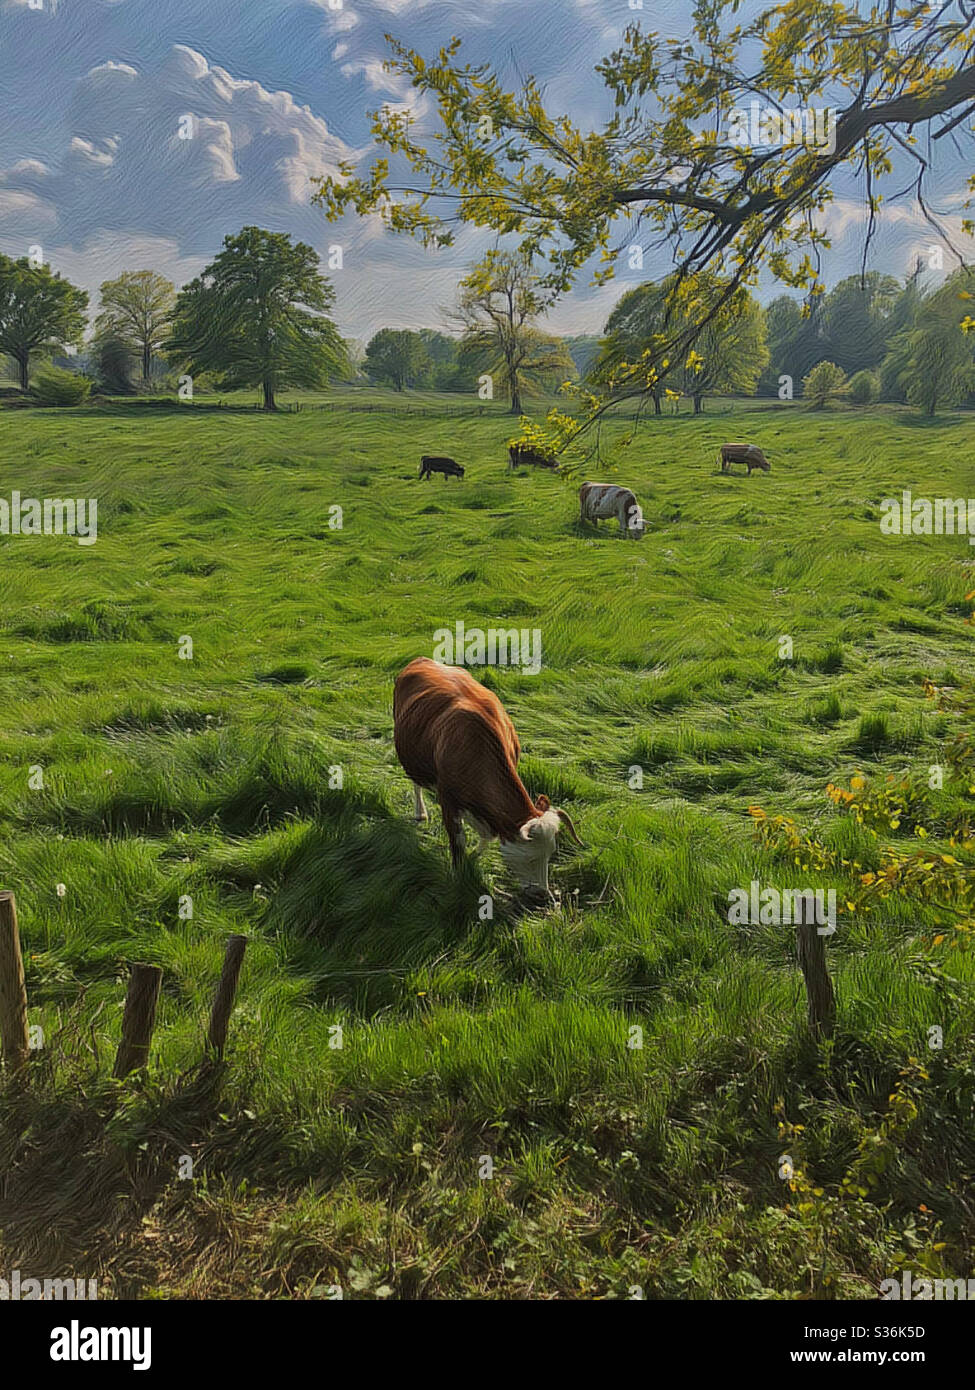 Artwork - A beautiful cow grazing in the pasture Stock Photo